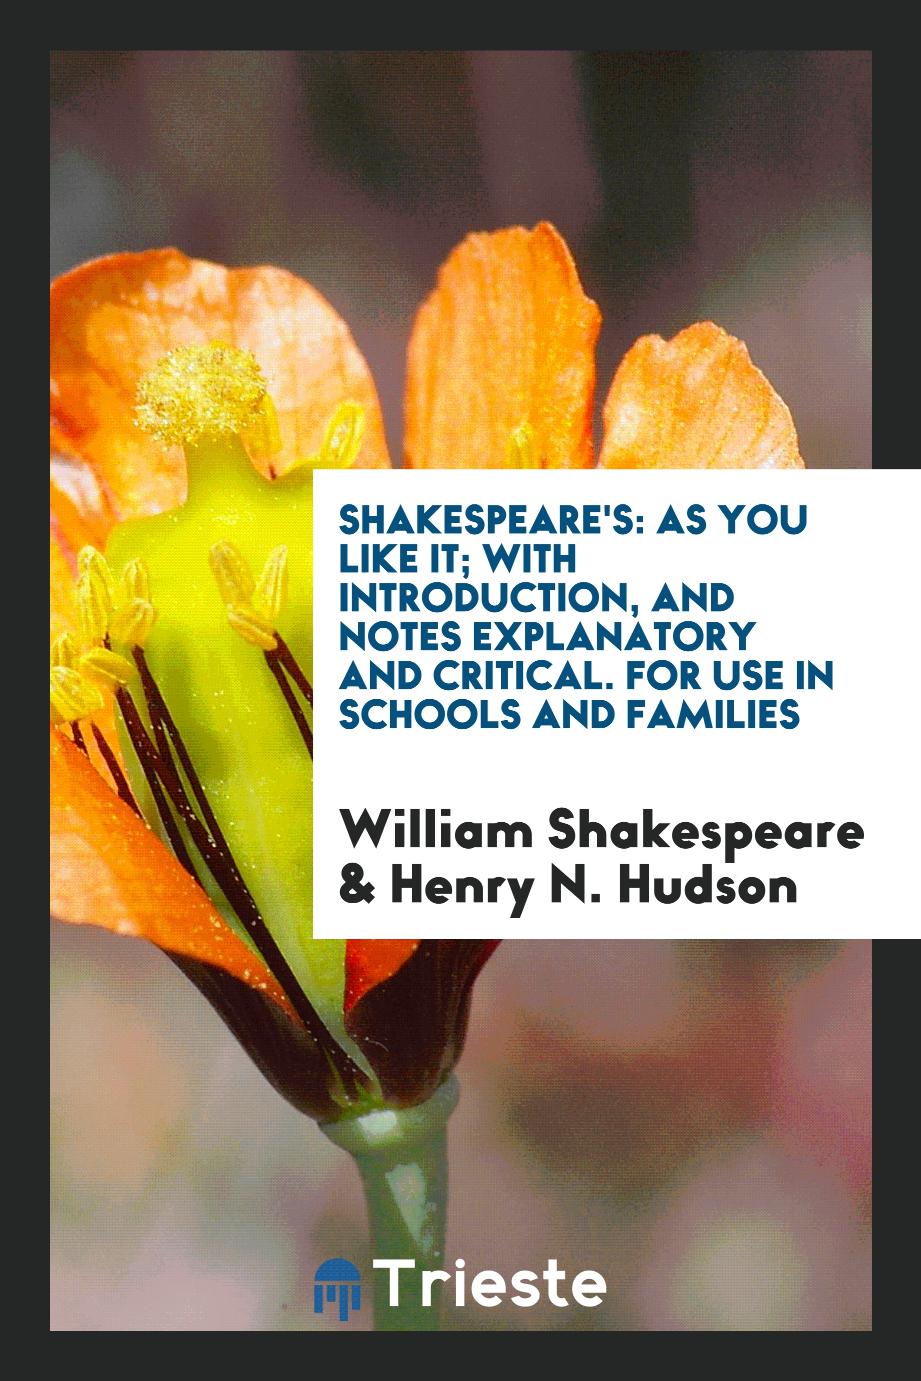 Shakespeare's: As You Like It; With Introduction, and Notes Explanatory and Critical. For Use in Schools and Families